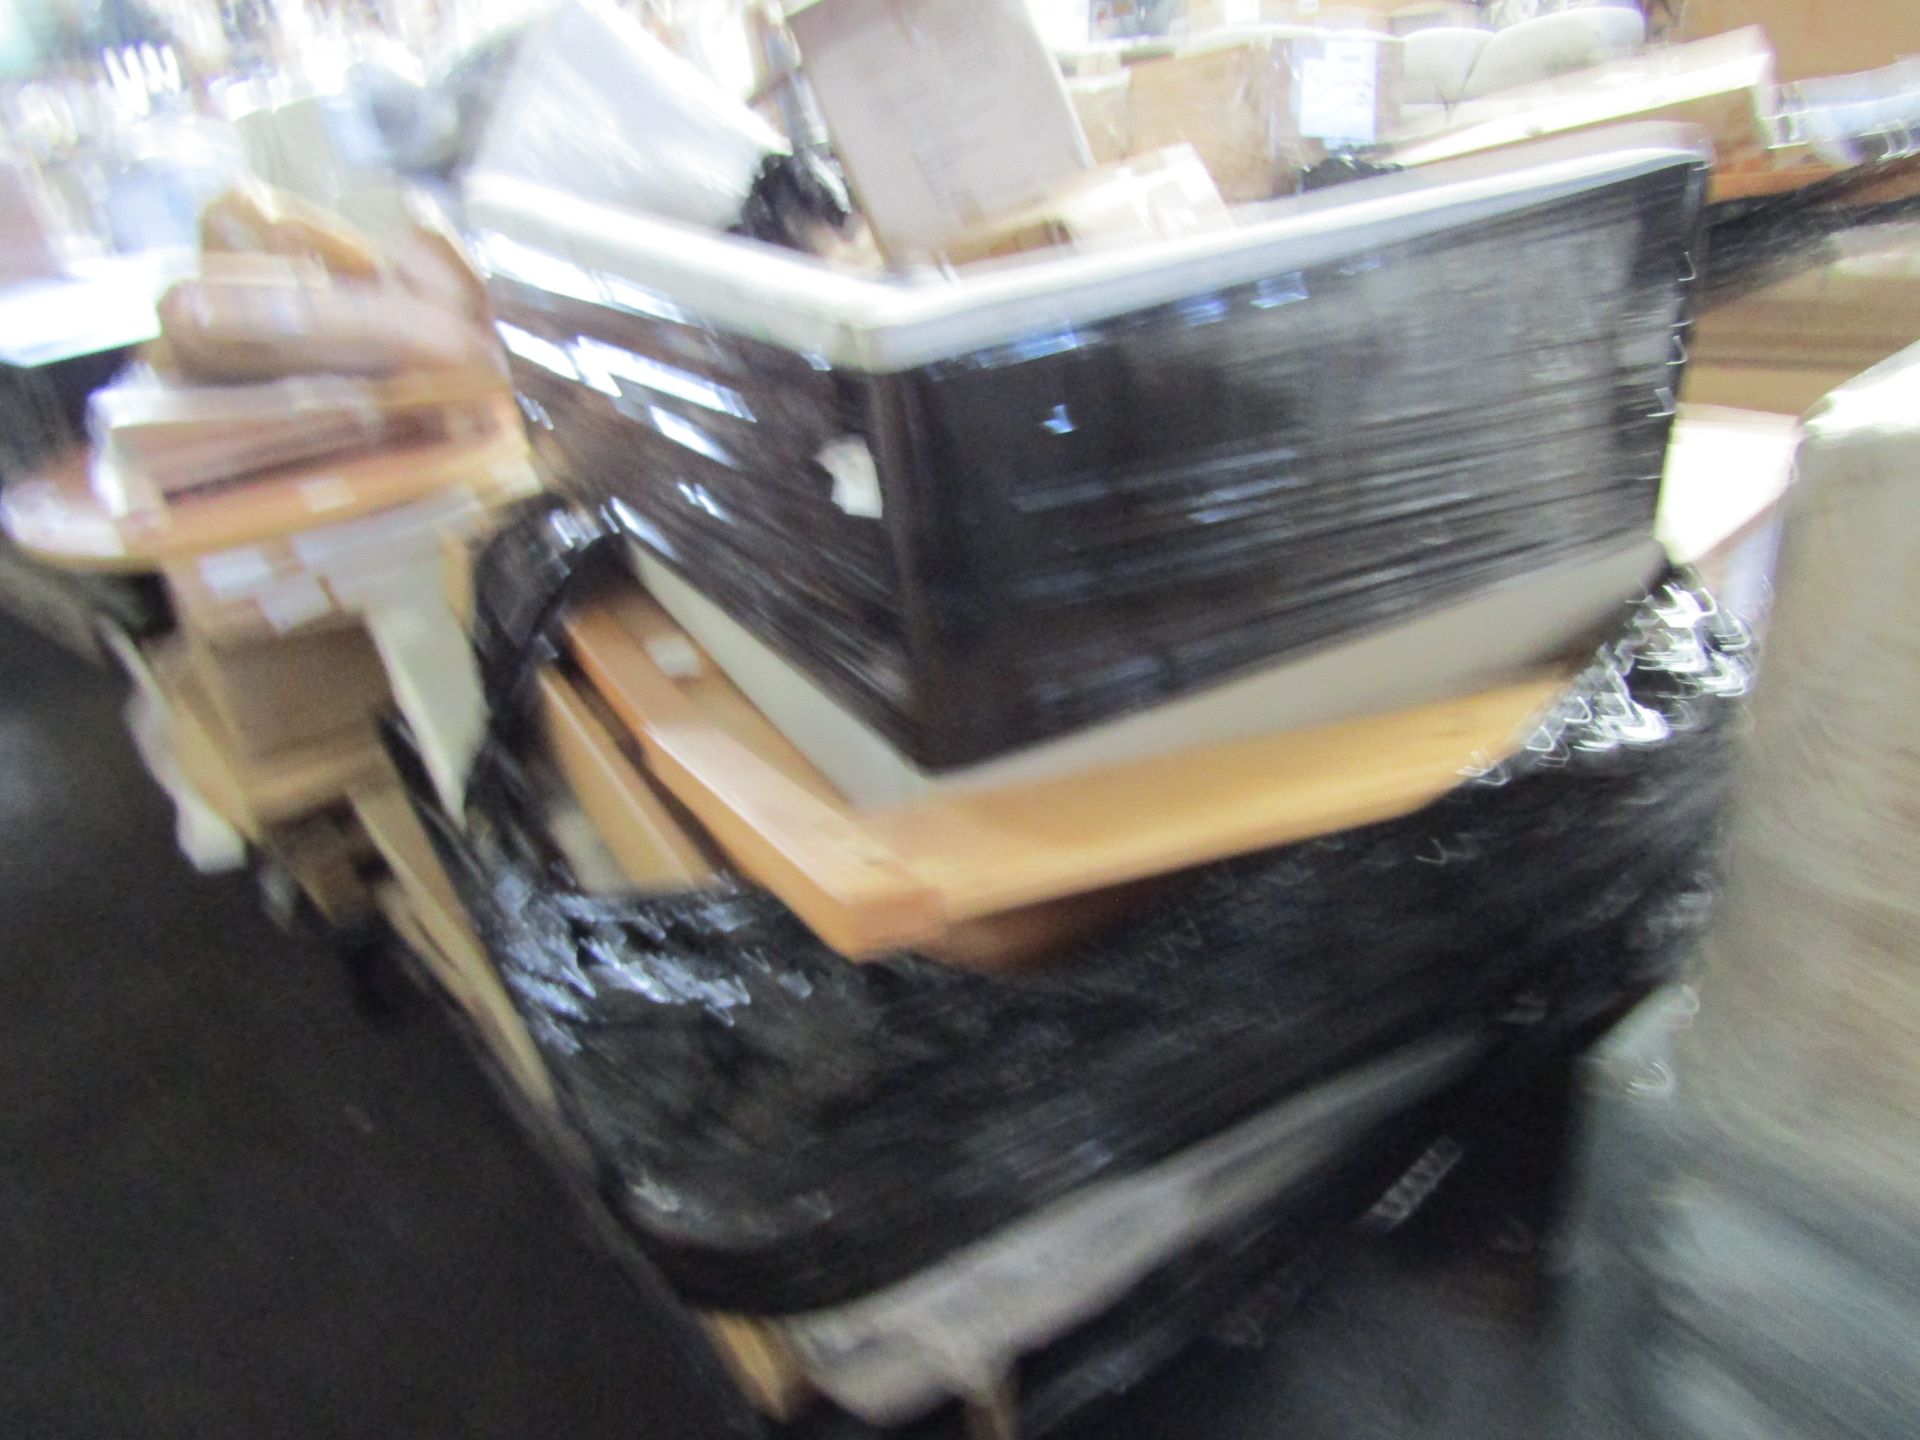 Pallet of sofa parts and unmanifested furniture items